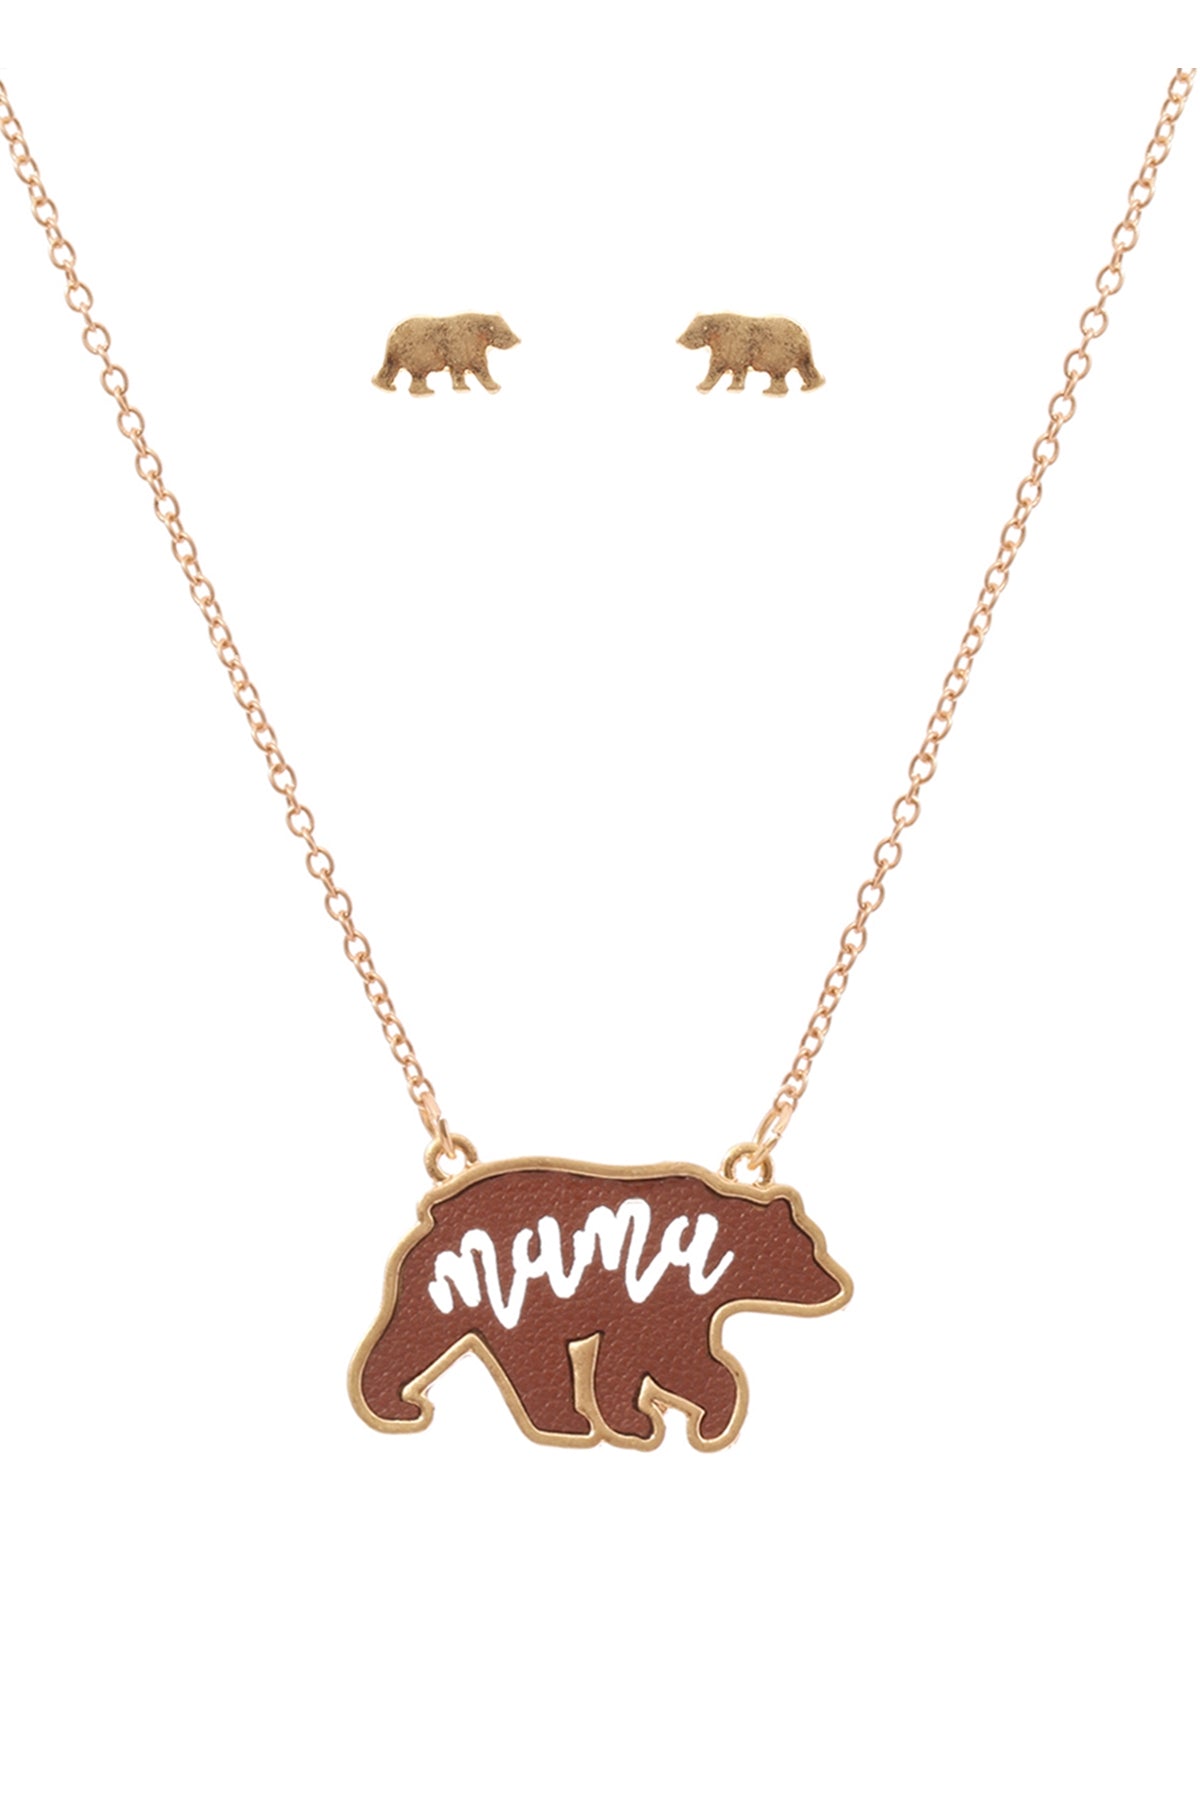 LEATHER BEAR METAL CHAIN PENDANT NECKLACE AND EARRING SET